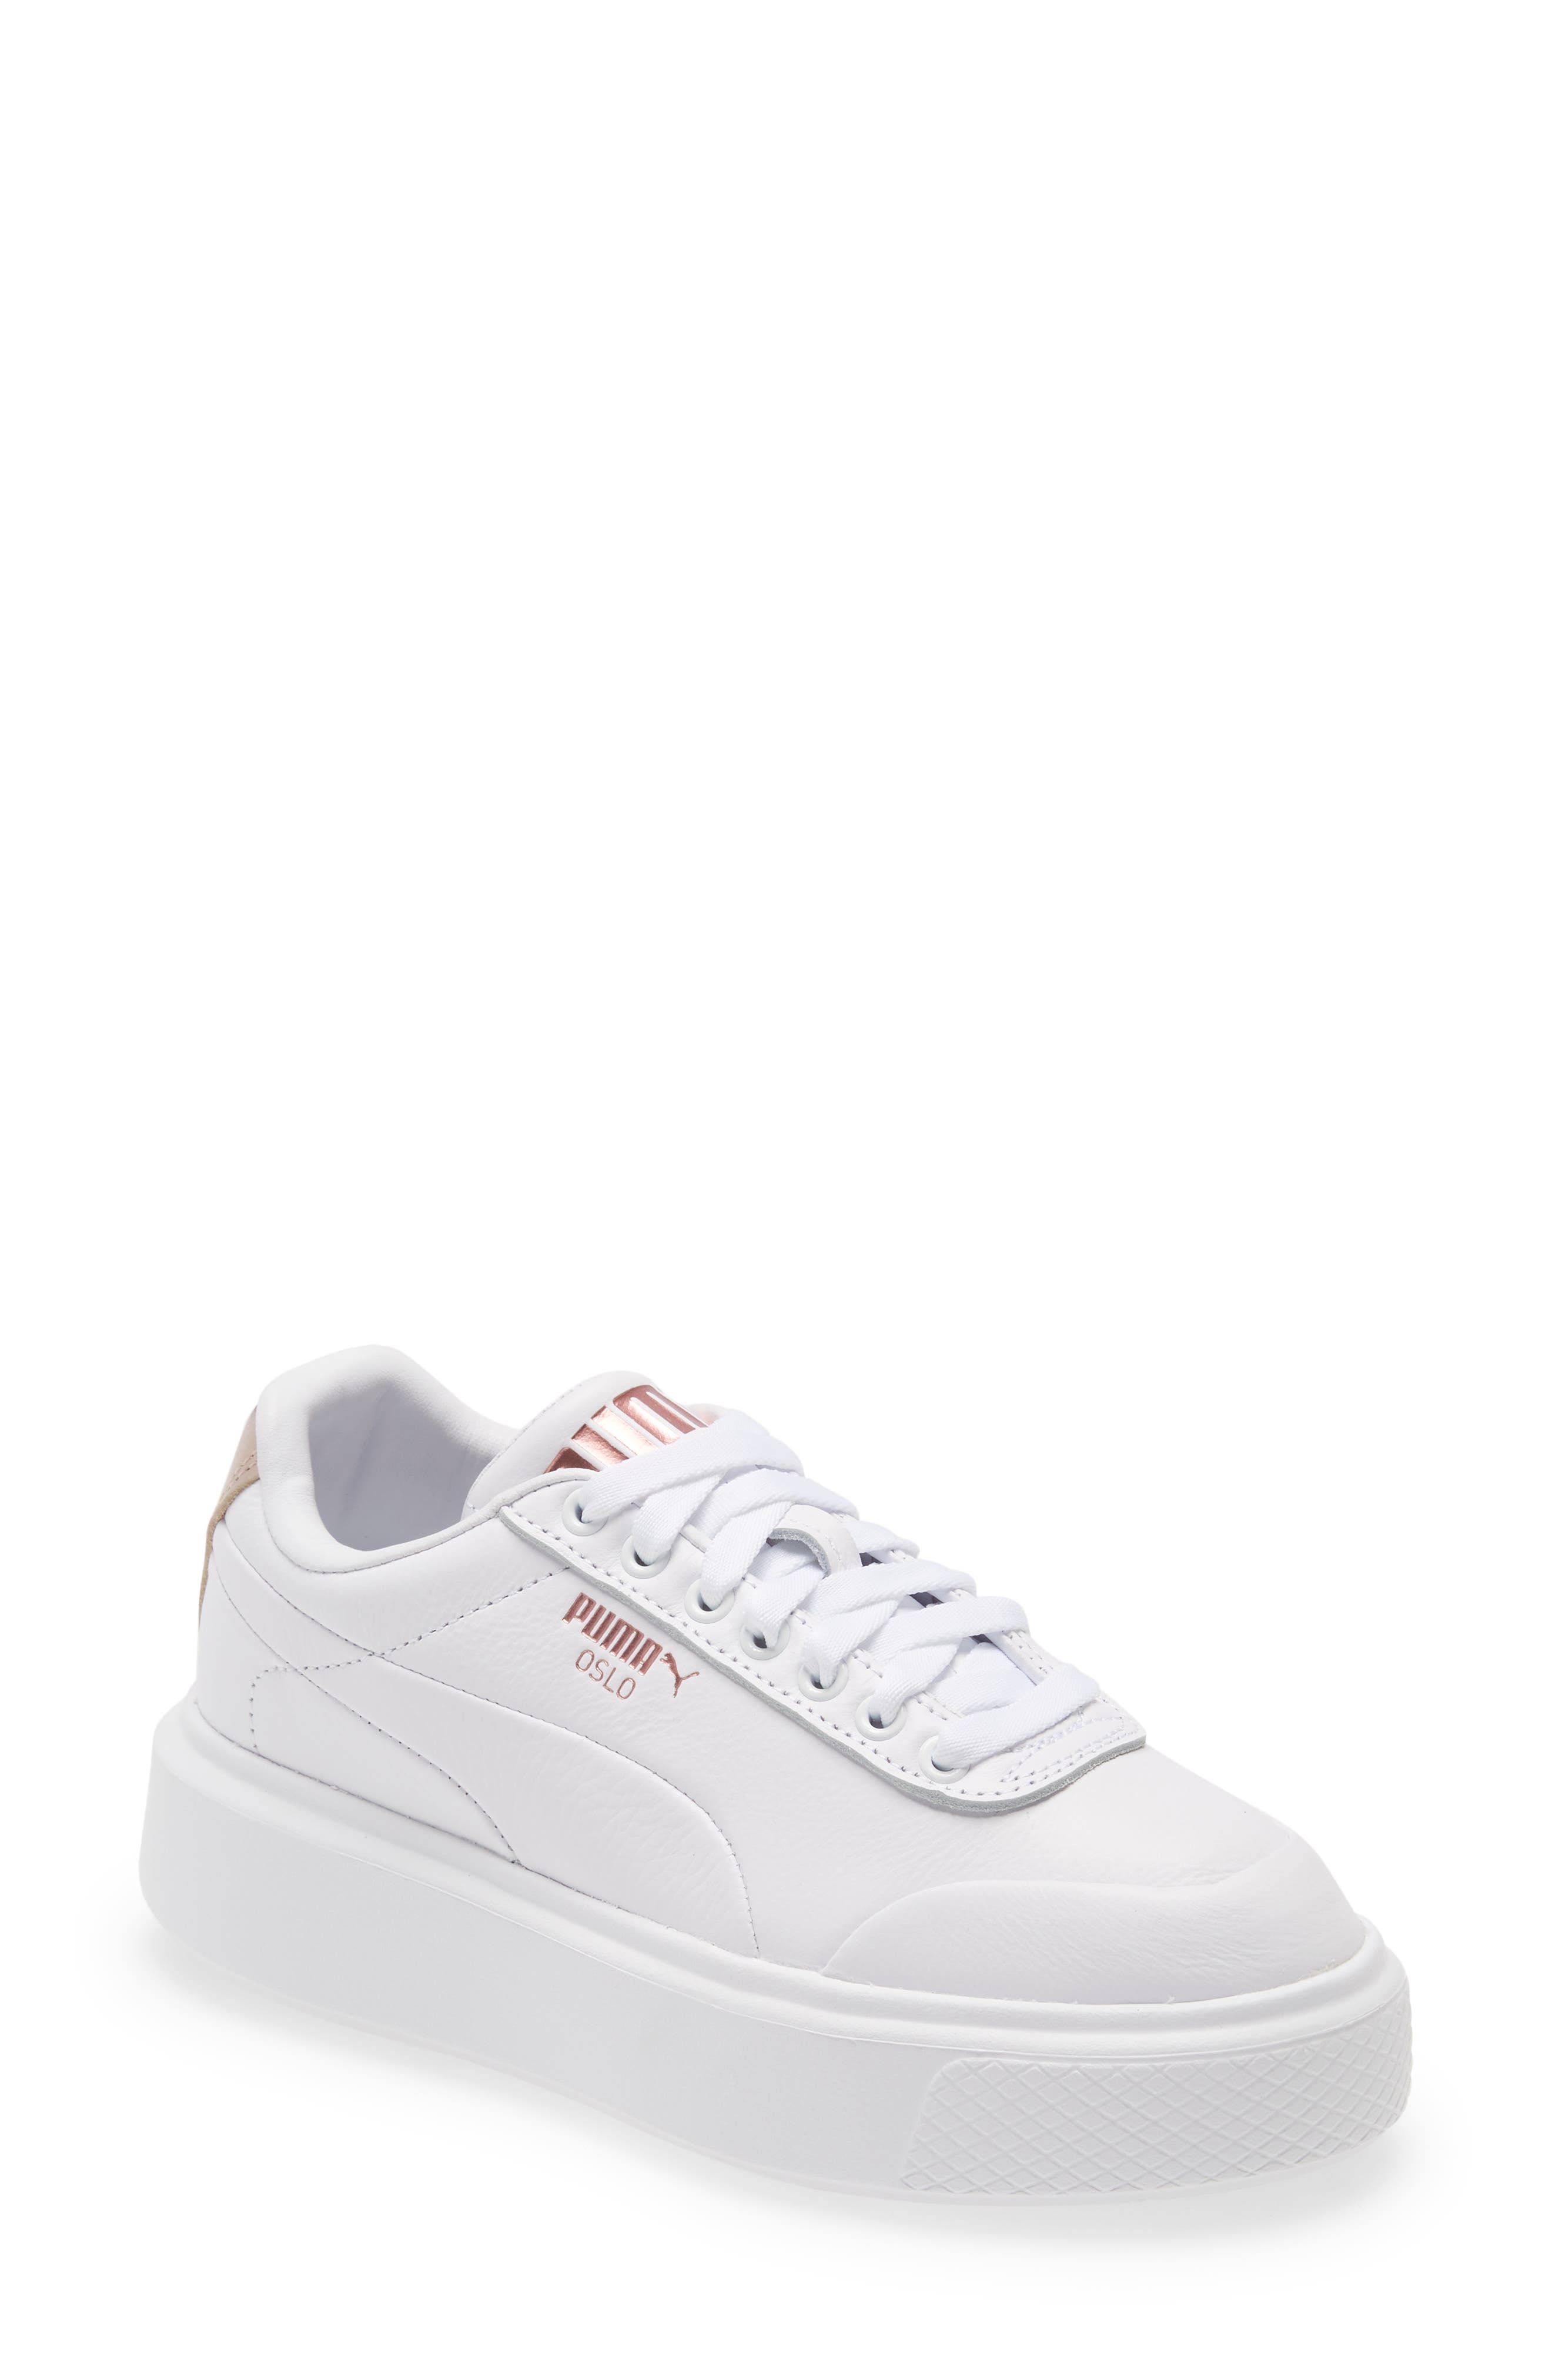 puma shoes sneakers for women